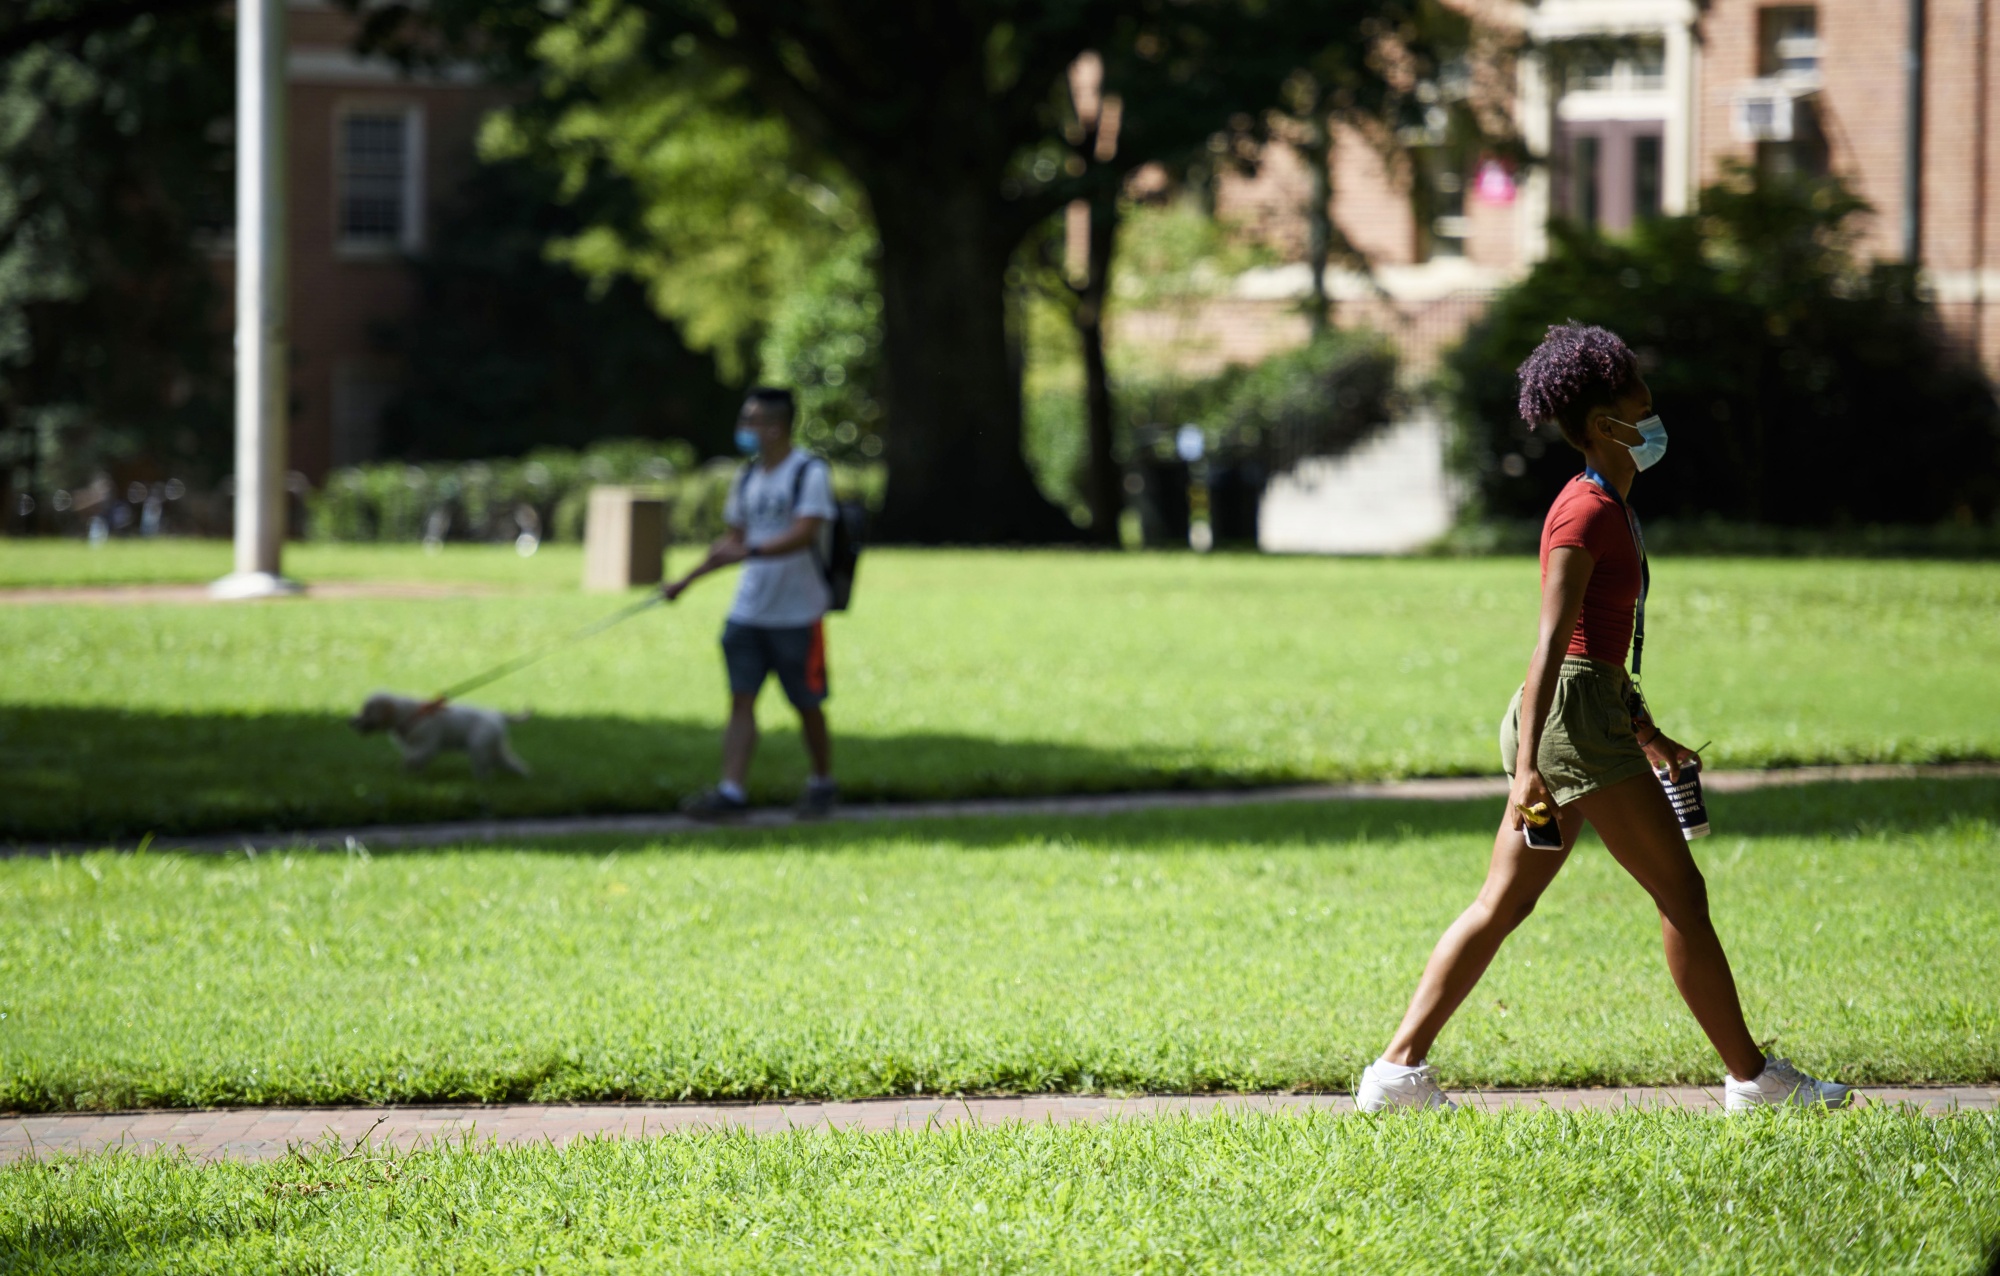 Students walk through the campus of the University of North Carolina at Chapel Hill on Aug. 18. The school halted in-person classes and reverted back to online courses after several Covid-19 outbreaks.&nbsp;